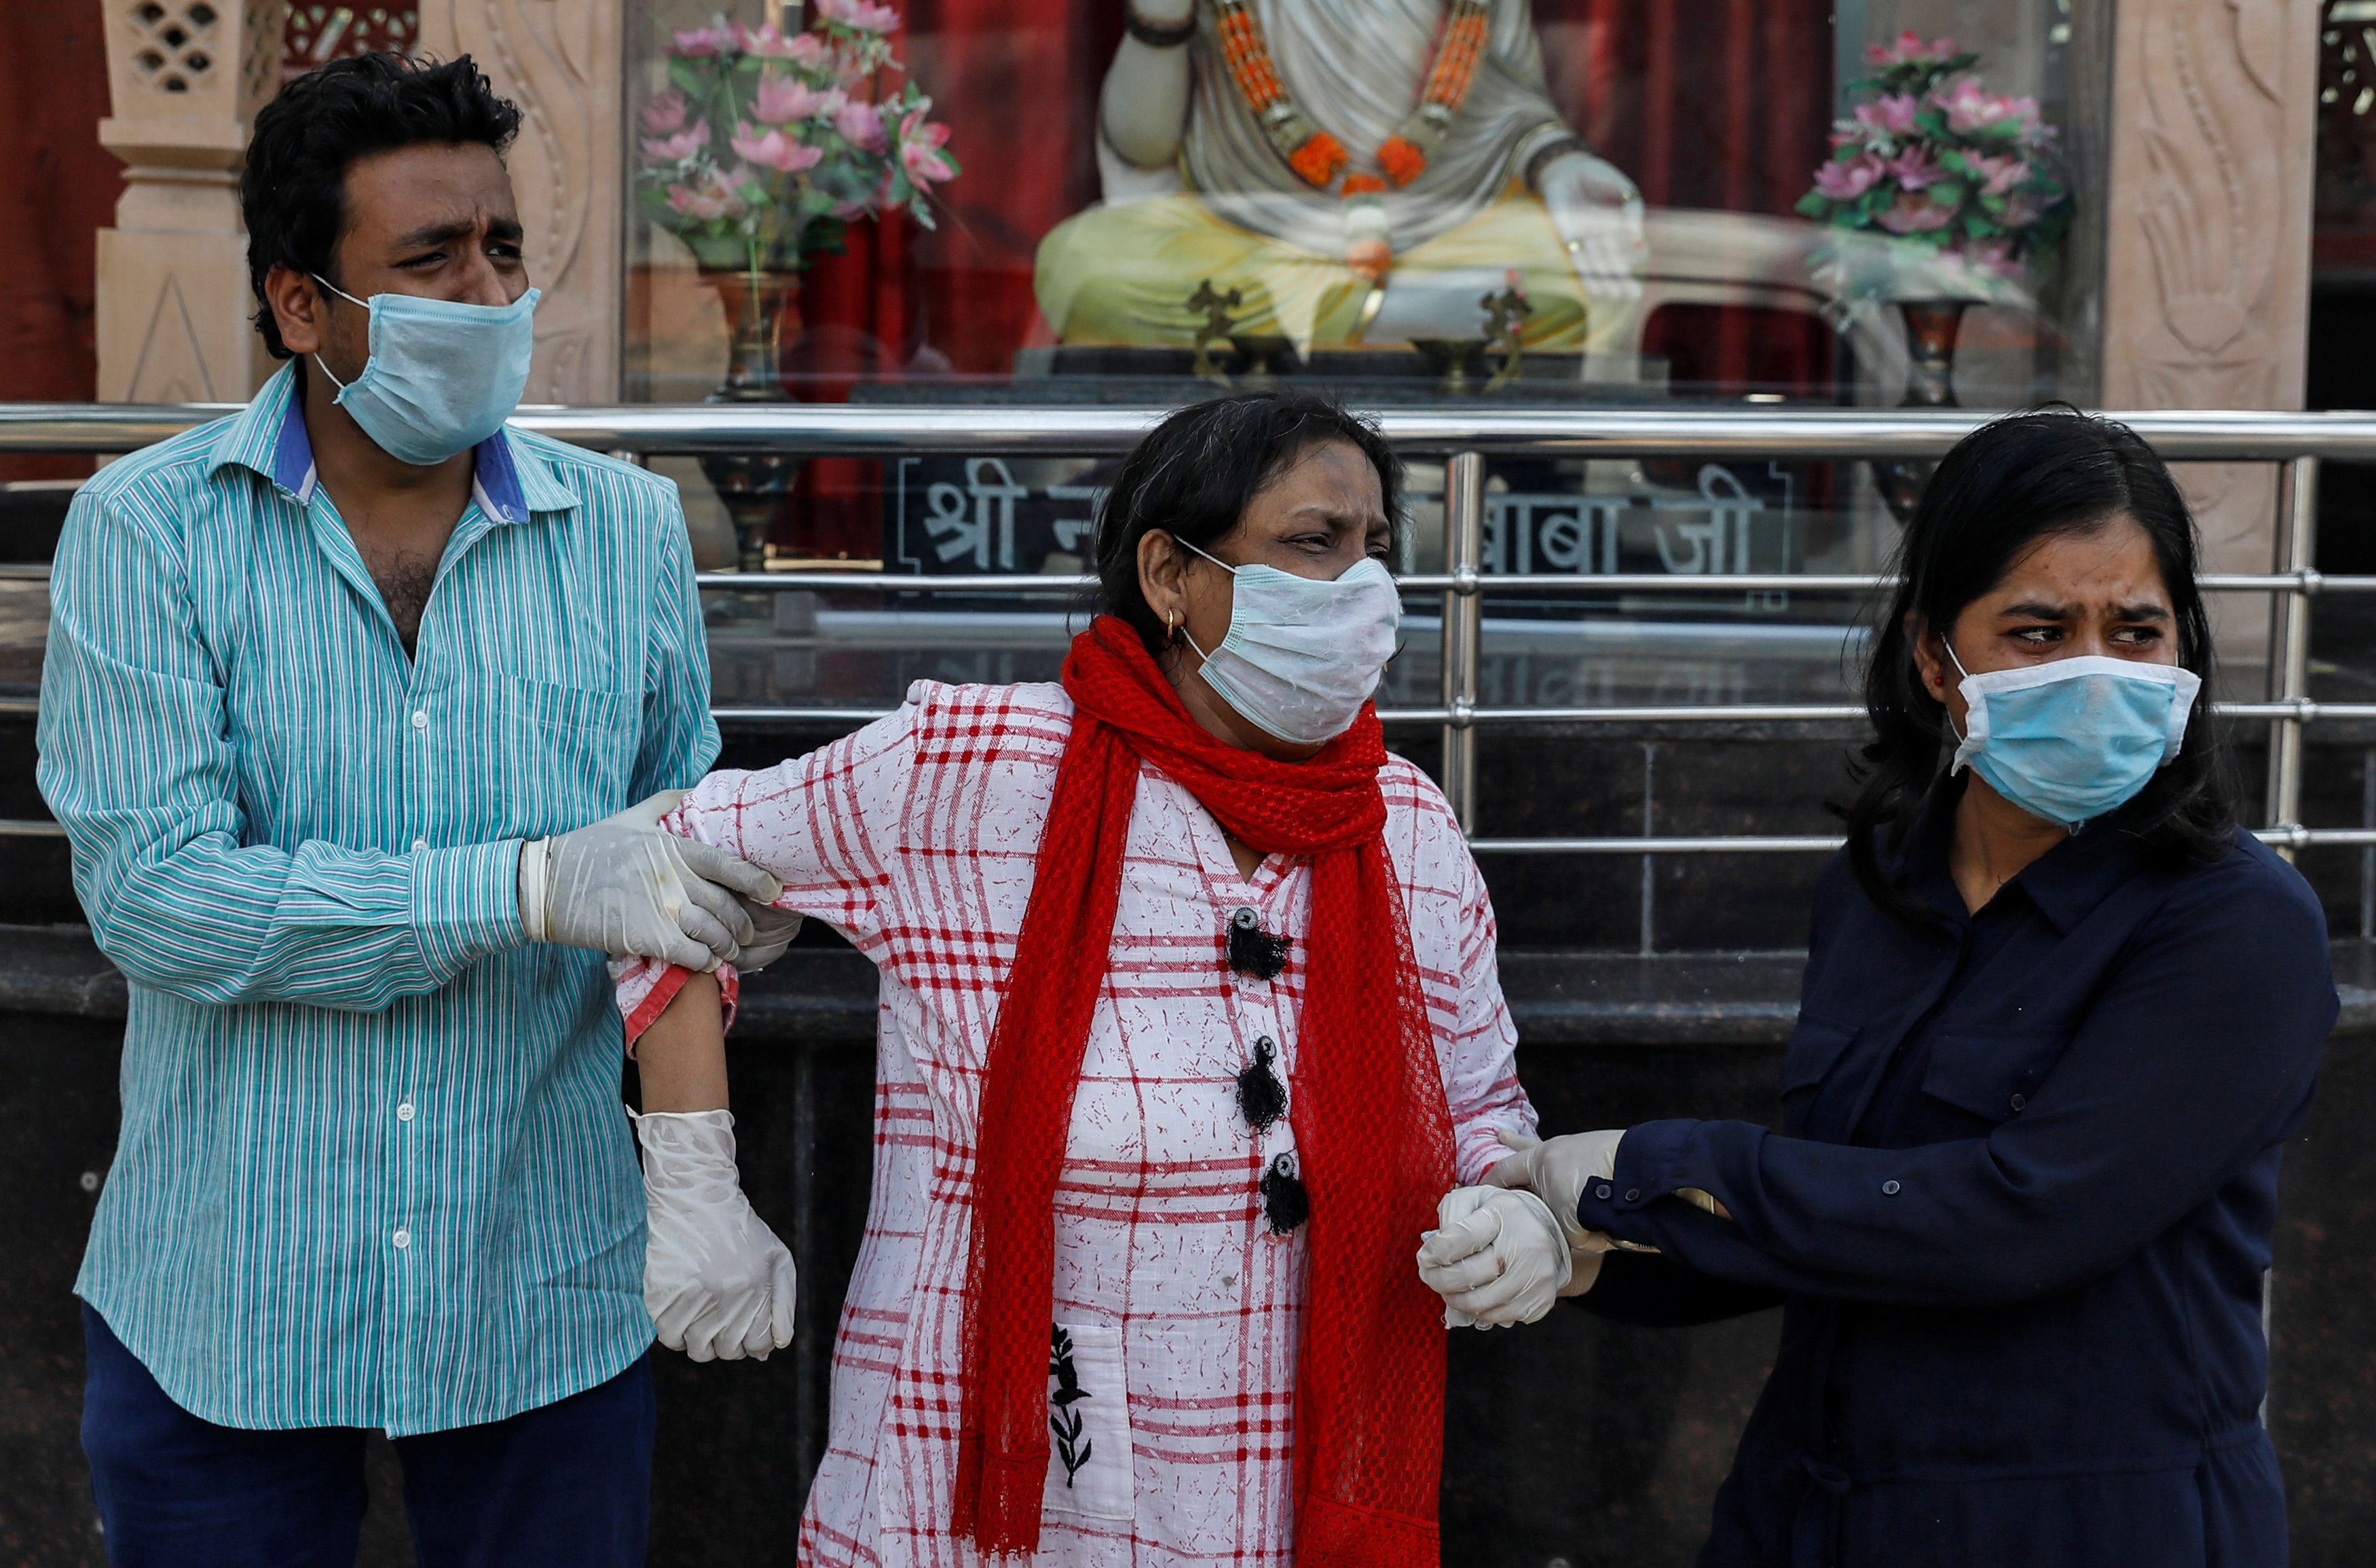 Family members of Virendra Gupta, who died due to the coronavirus disease (COVID-19), wear protective masks and gloves as they mourn during his cremation at the Nigambodh Ghat crematorium in New Delhi, India, June 1, 2020. Photo: Reuters